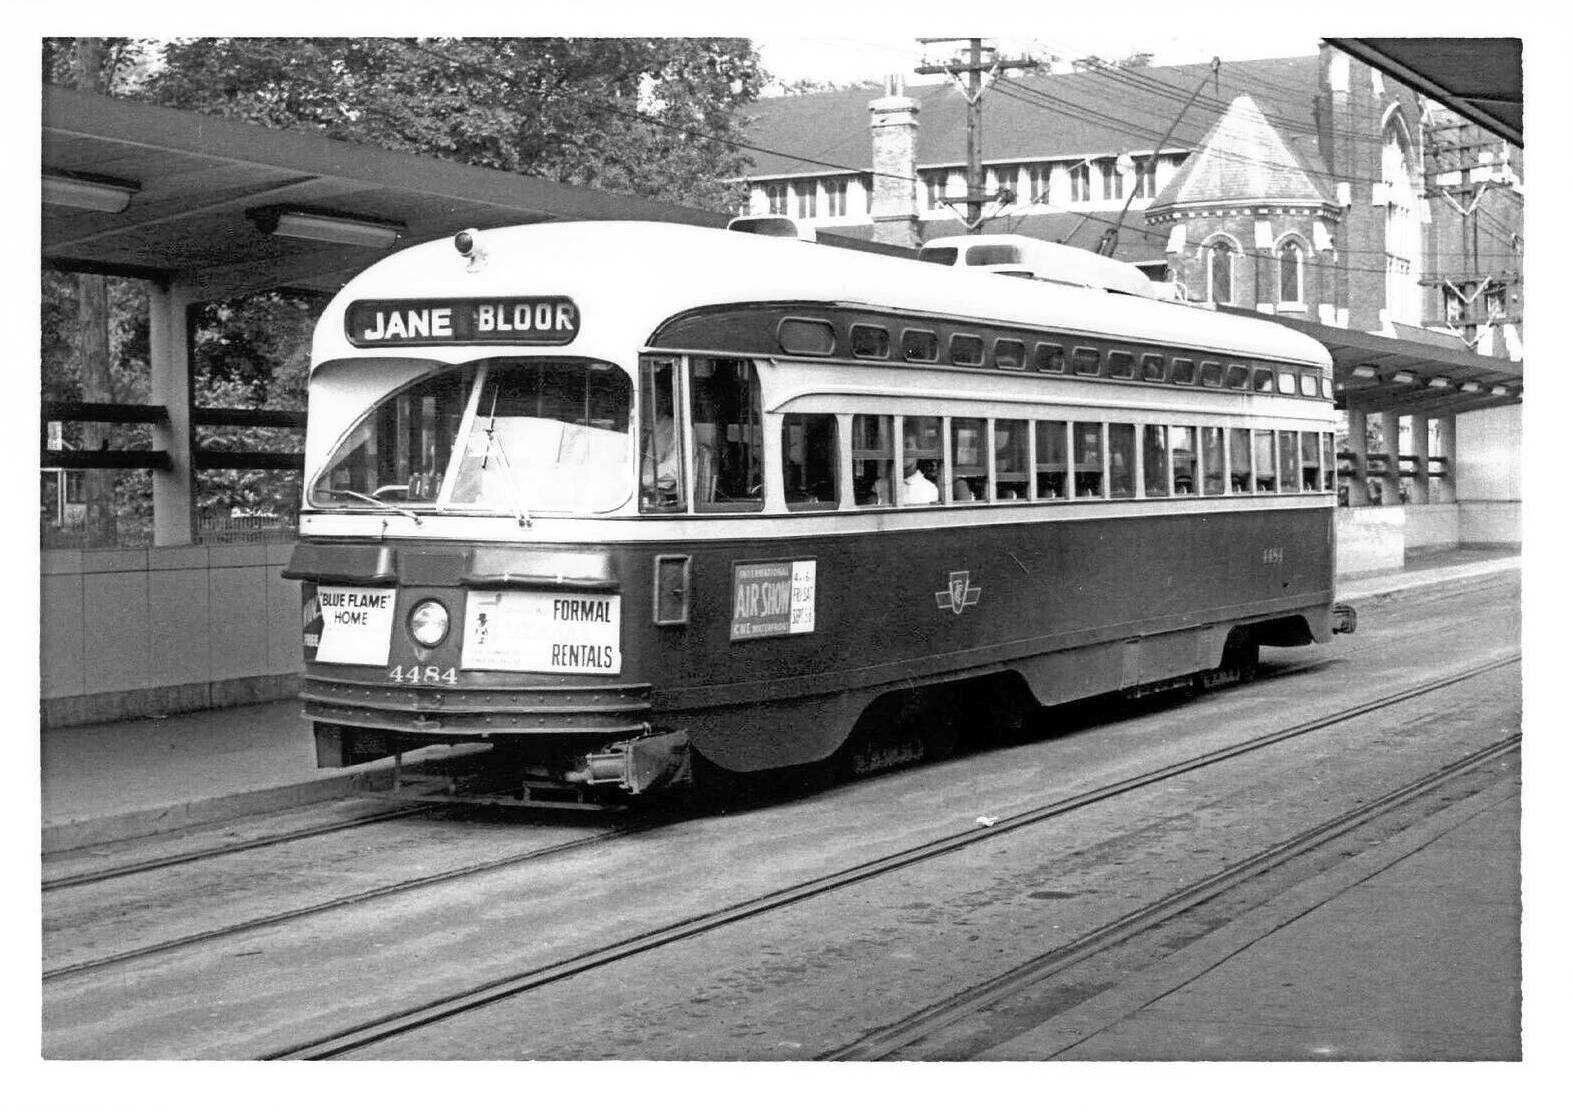 A PHOTO - TORONTO - TTC PCC STREETCAR - BLOOR STREET NEAR THE LARGE ISLAND STOPS THAT USED TO BE ON BLOOR NEAR YONGE - CAR HEADED W - 1958